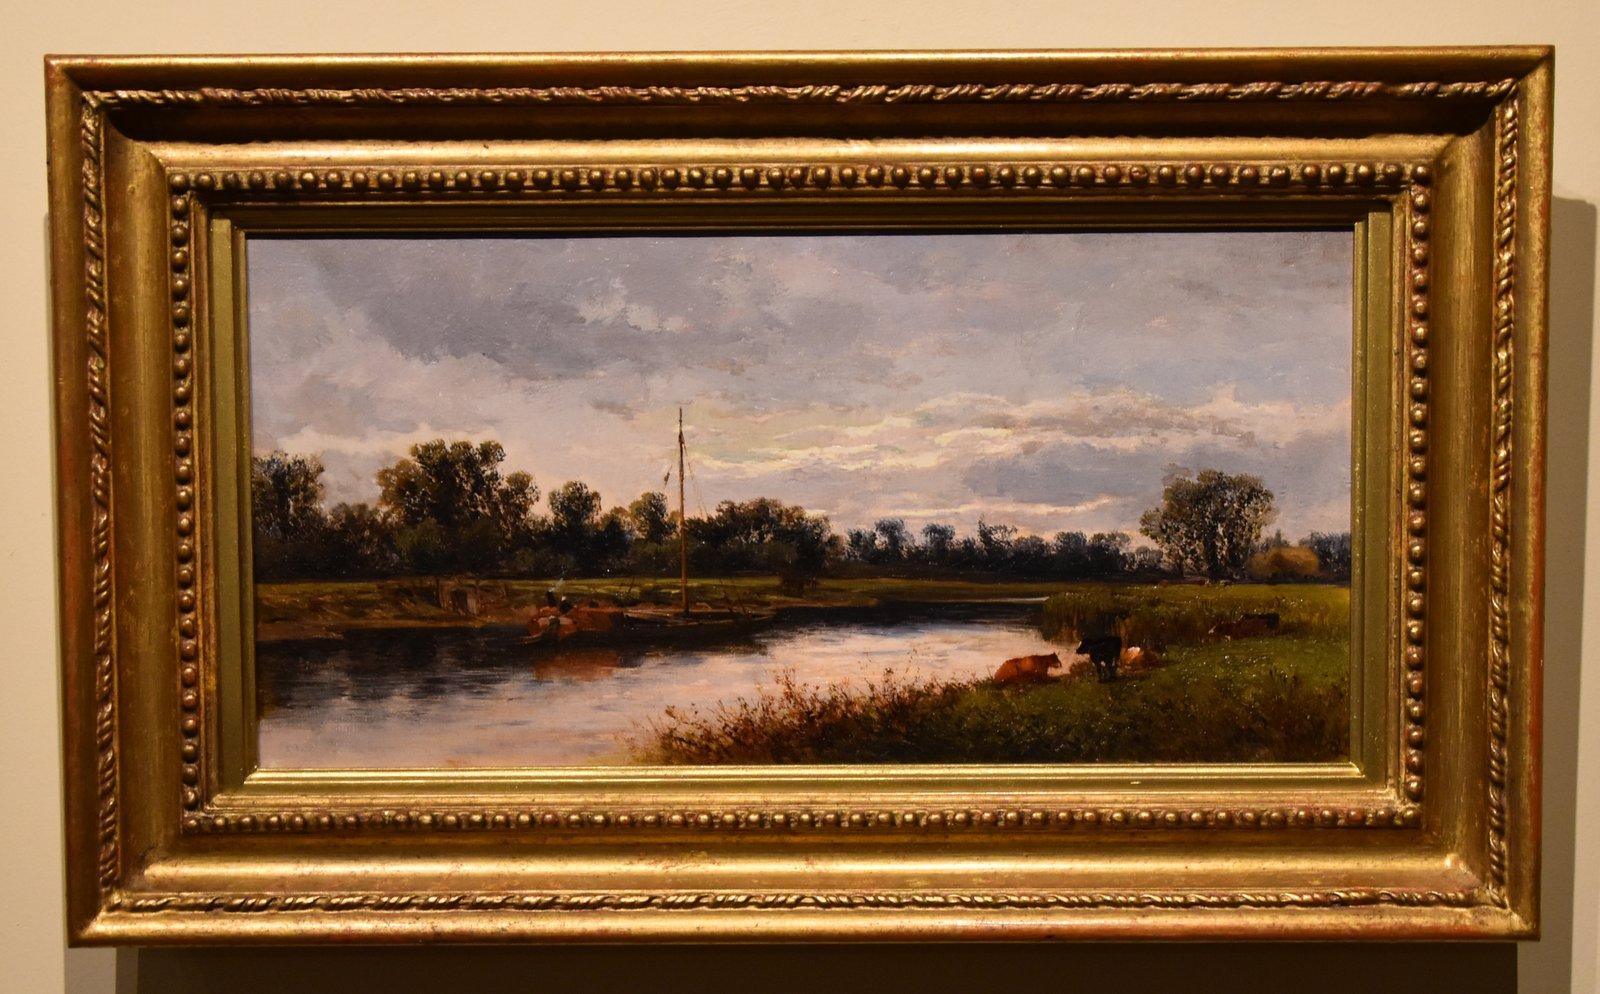 Oil Painting by William Pitt "The Severn above the Lowerloud Tewksbury" 1818 - 1900
A Midlands Landscape painter of local views and south-west scenes and regular exhibitor in London and Birmingham and Manchester. Oil on canvas. Signed monogram and